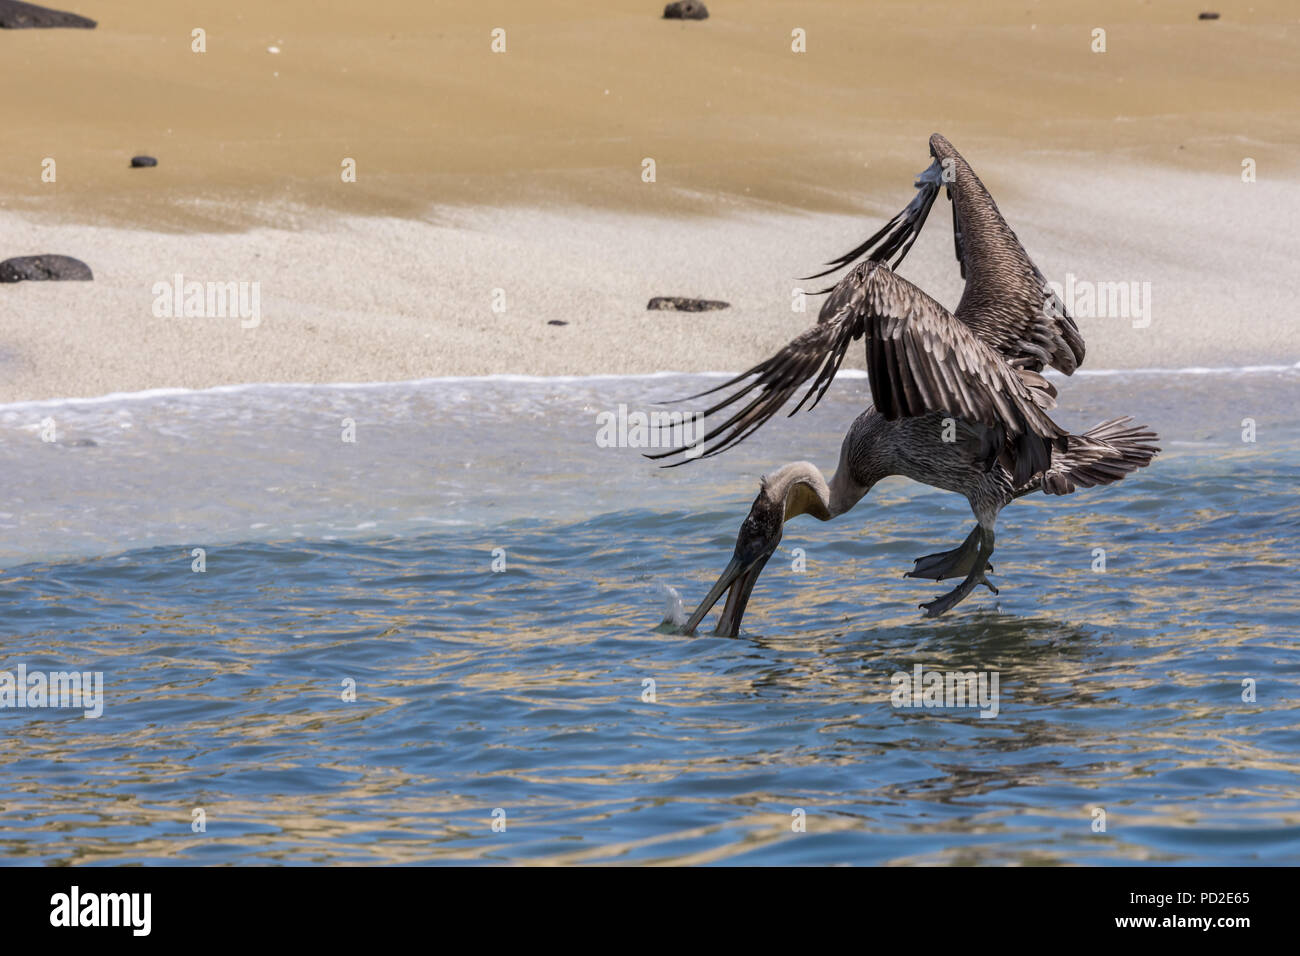 Brown pelican (Pelecanus occidentalis) diving for fish near a beach in the Galapagos Islands, Stock Photo